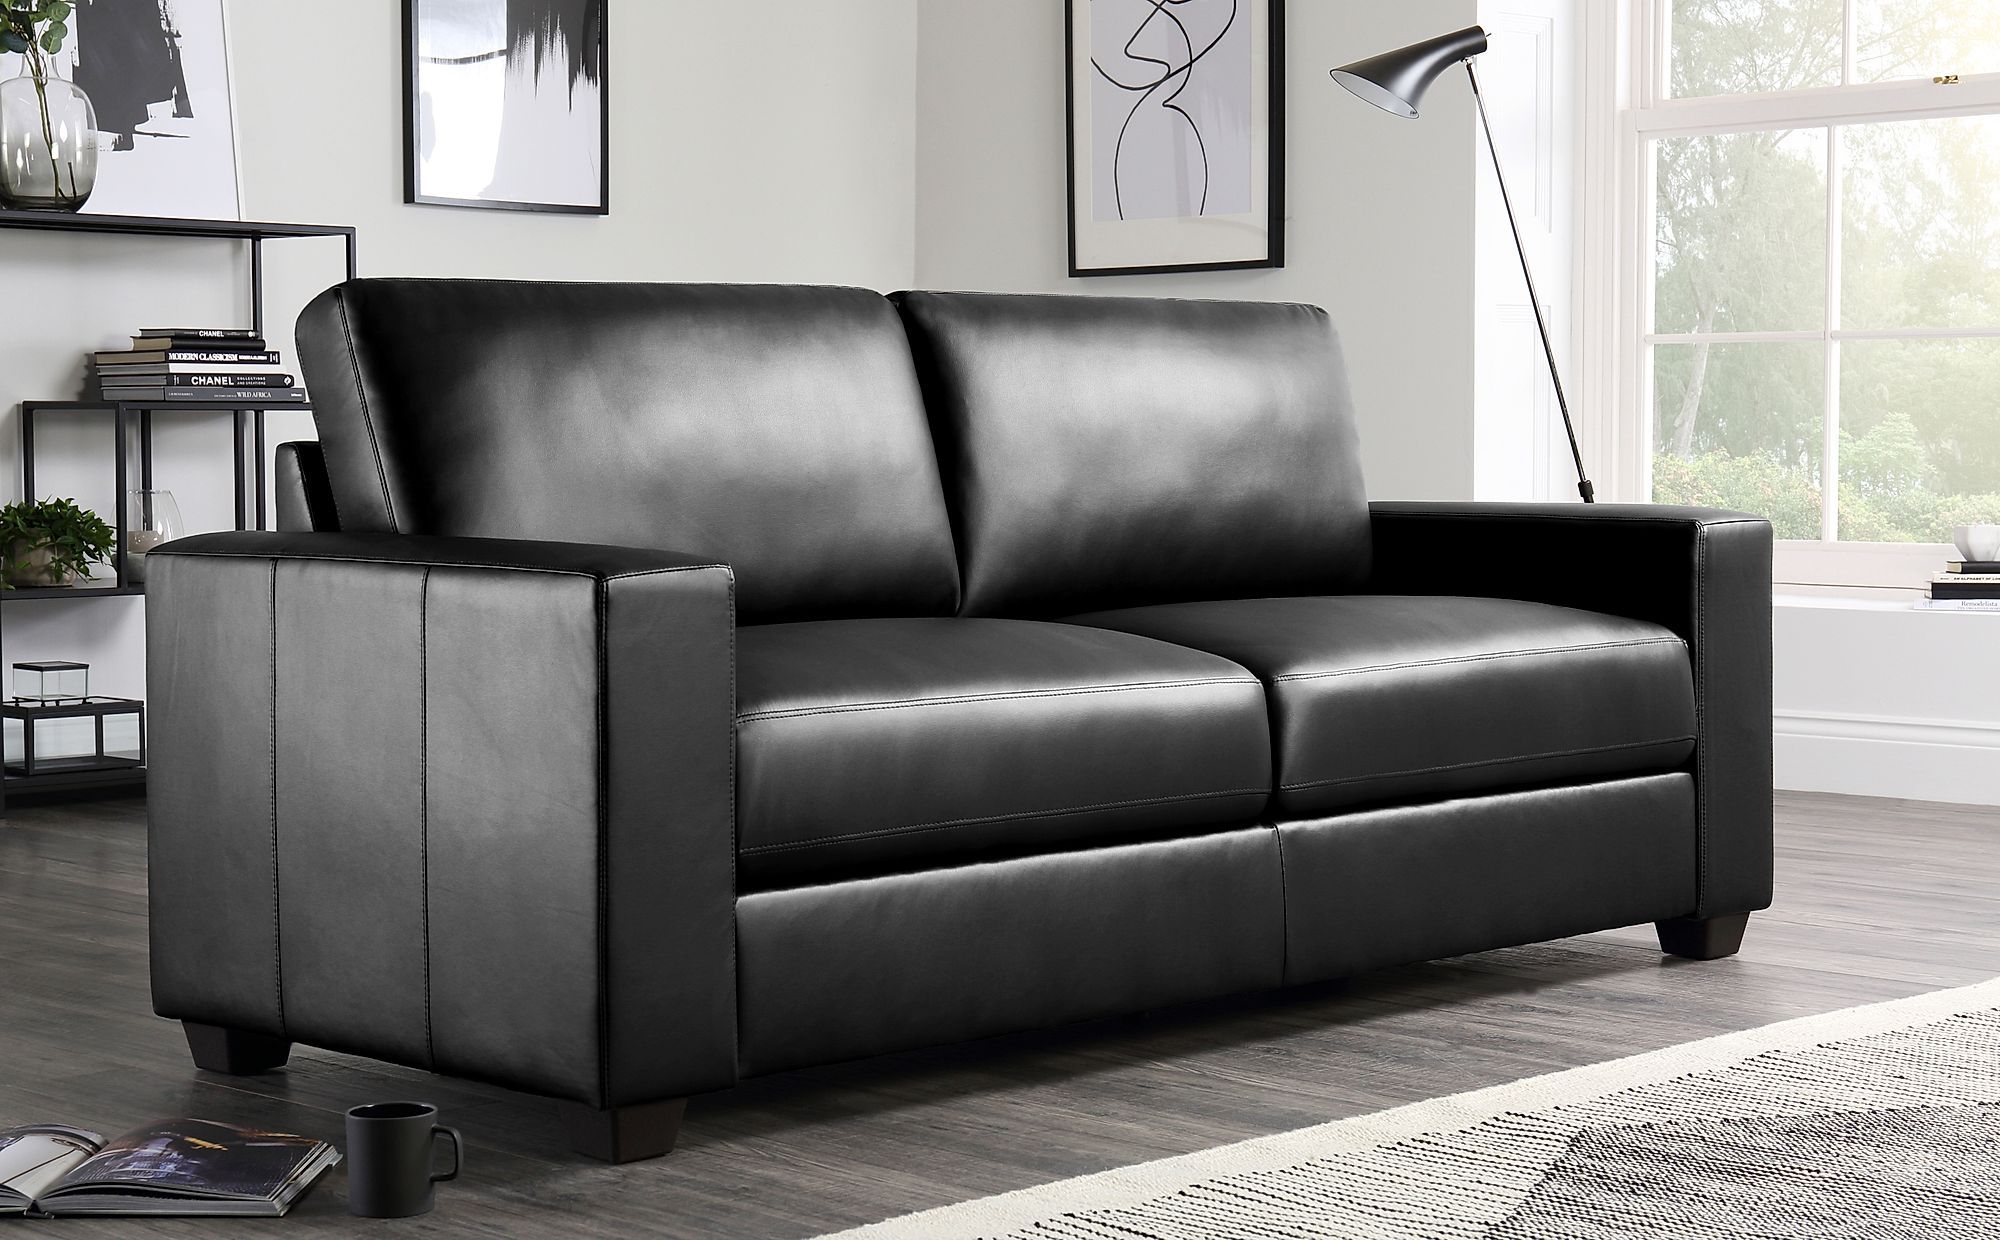 Black Leather 3 Seater – The Arched Arms Look Great On This Sofa Suite (View 7 of 20)